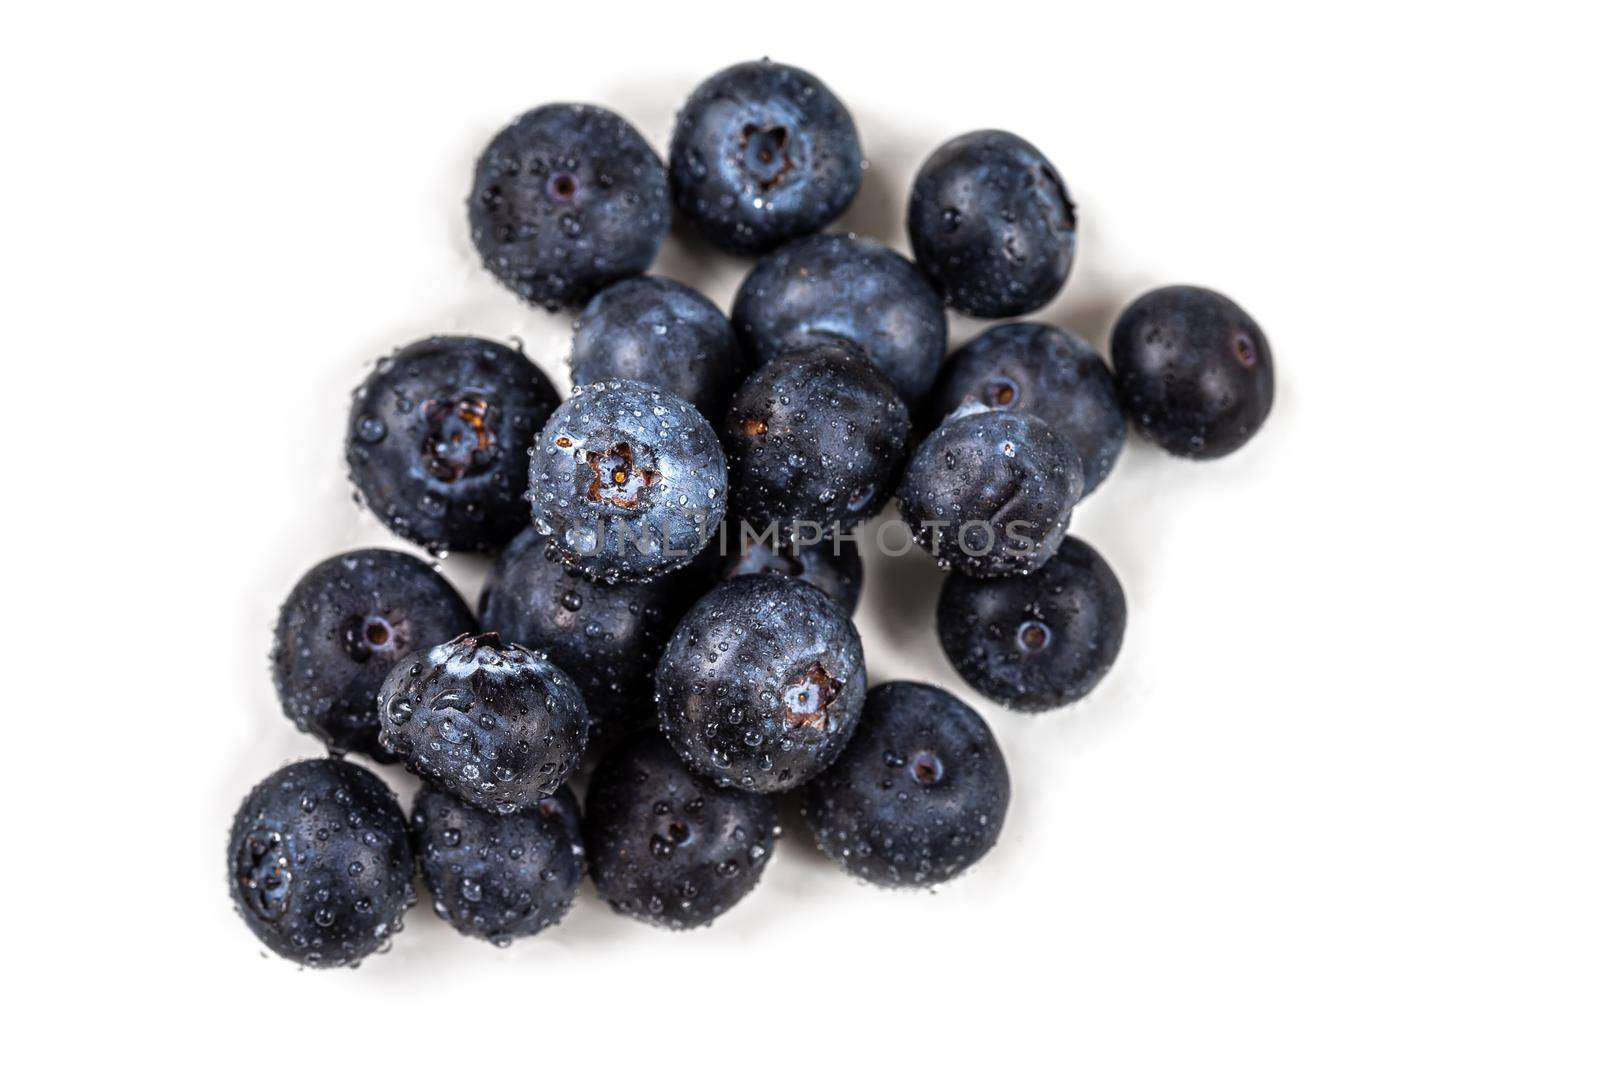 Blueberry berries in macro on a white background